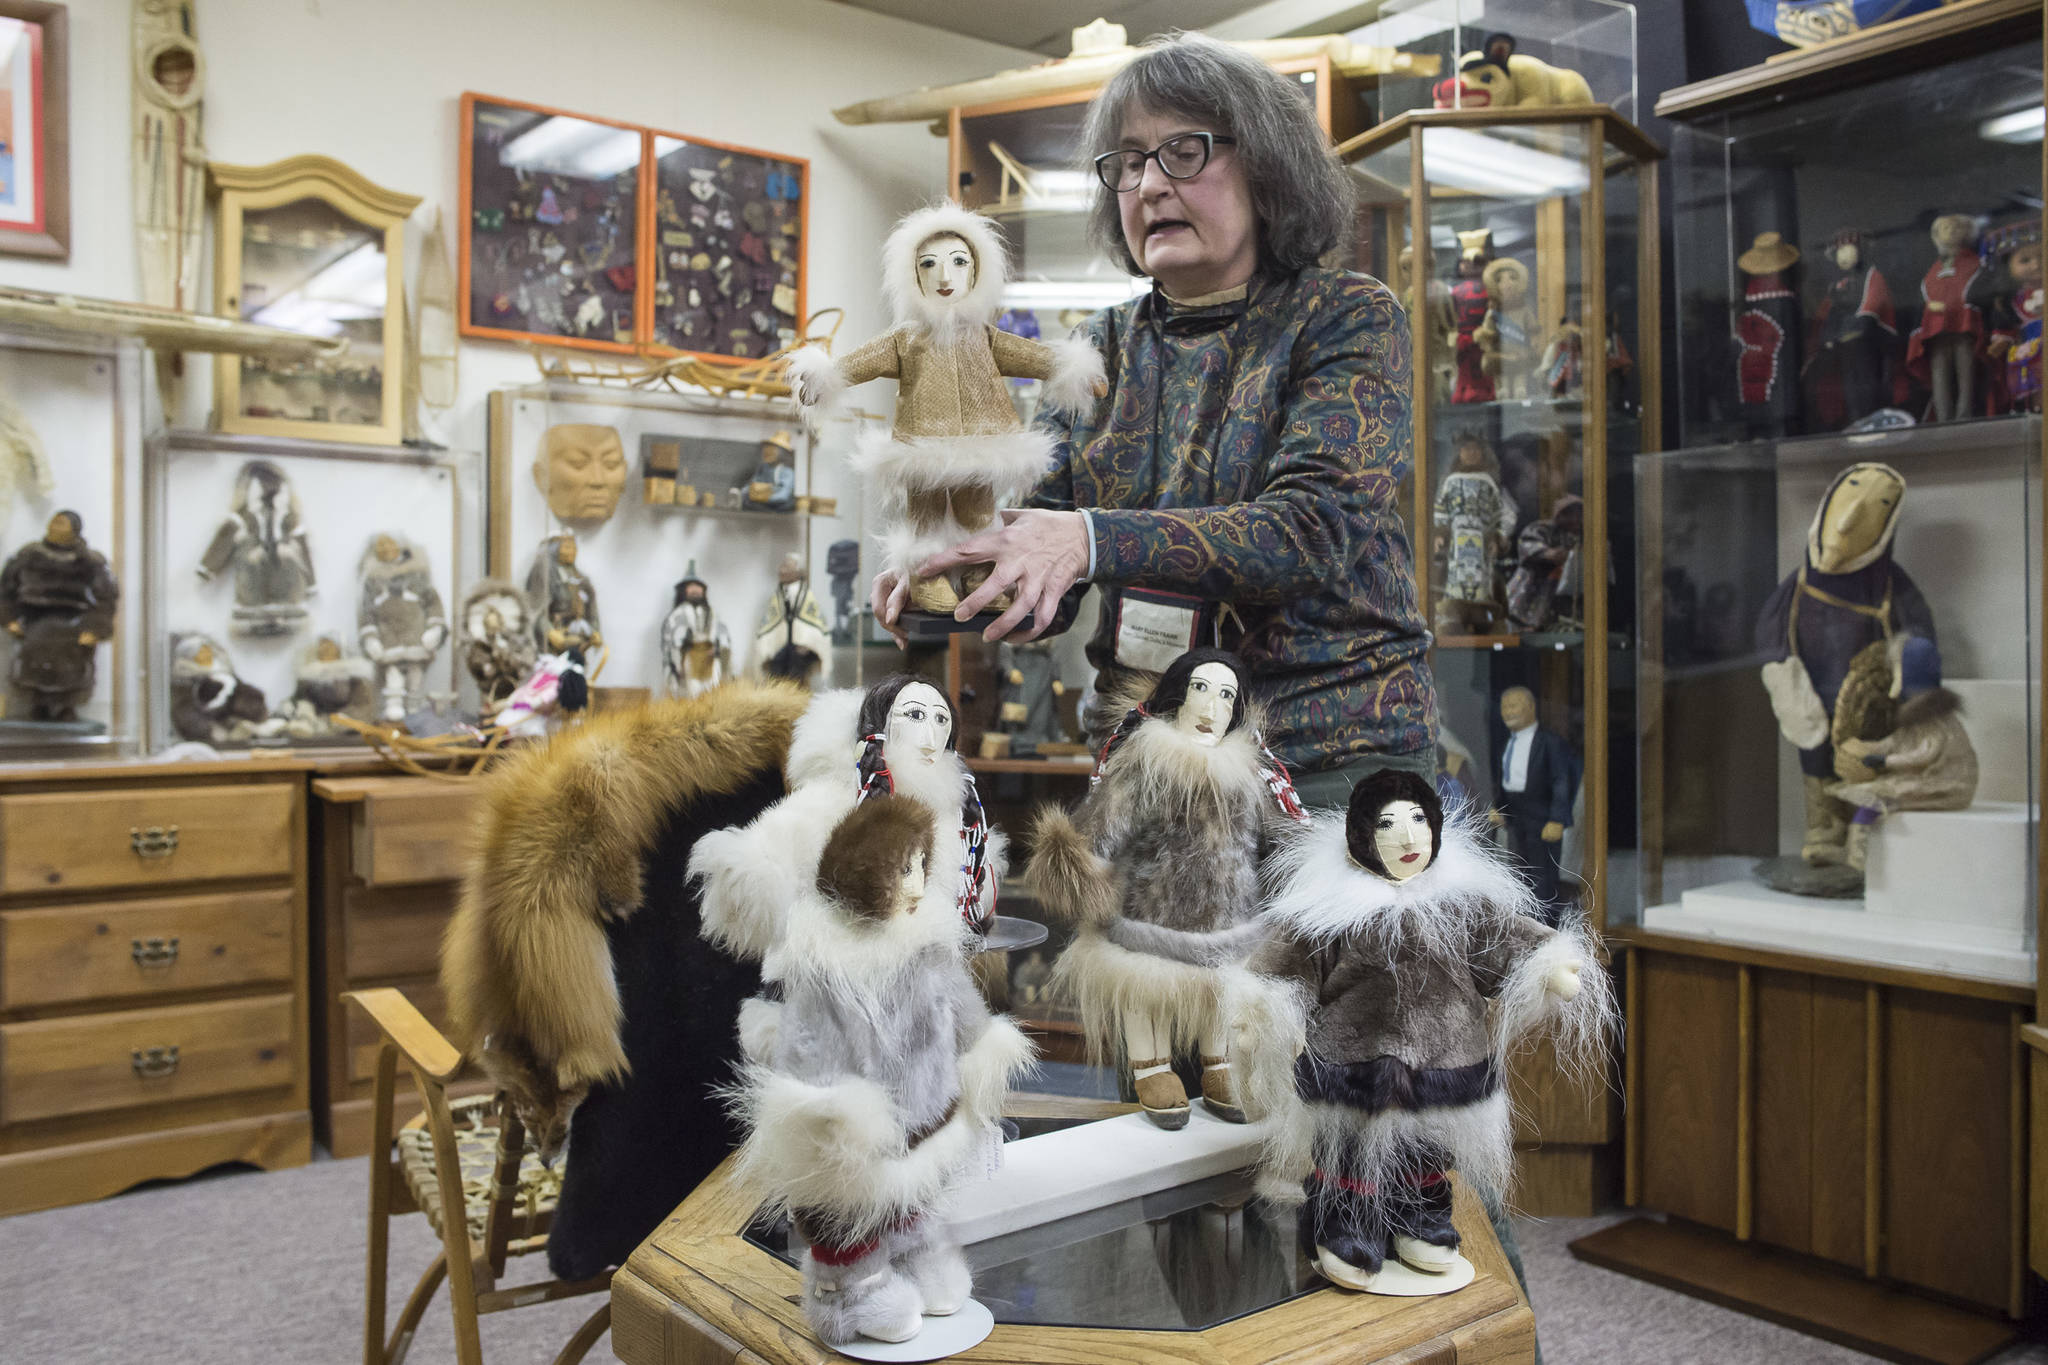 Mary Ellen Frank shows off the work of Saint Lawrence Island artist Anacoma Slwooko at Aunt Claudia’s Doll Museum during First Friday on Friday, Jan. 4, 2019. (Michael Penn | Juneau Empire)